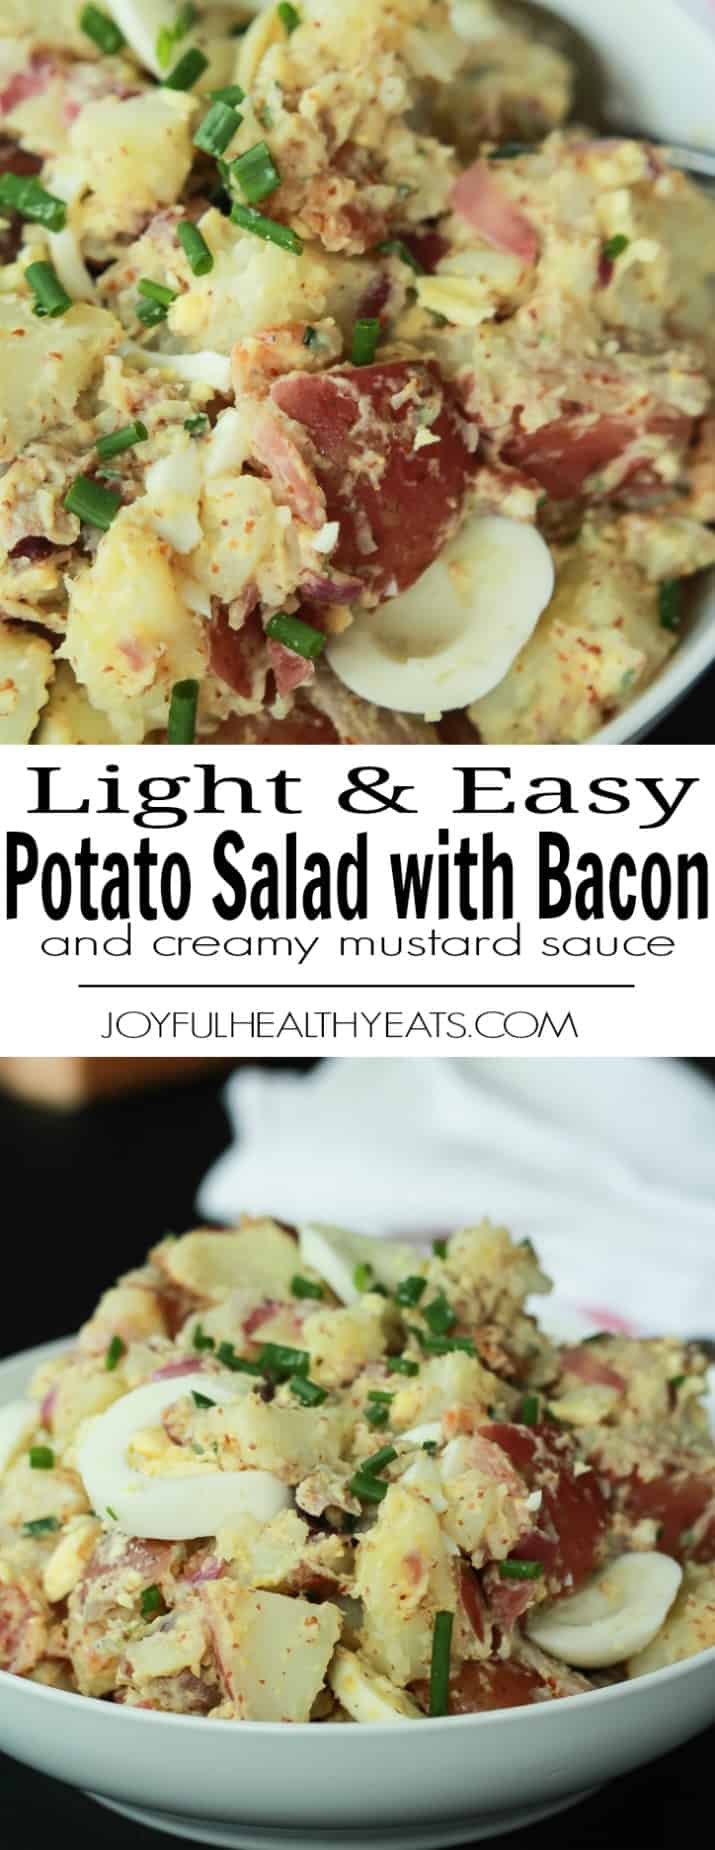 Recipe collage for Light & Easy Potato Salad with Bacon and Creamy Mustard Sauce